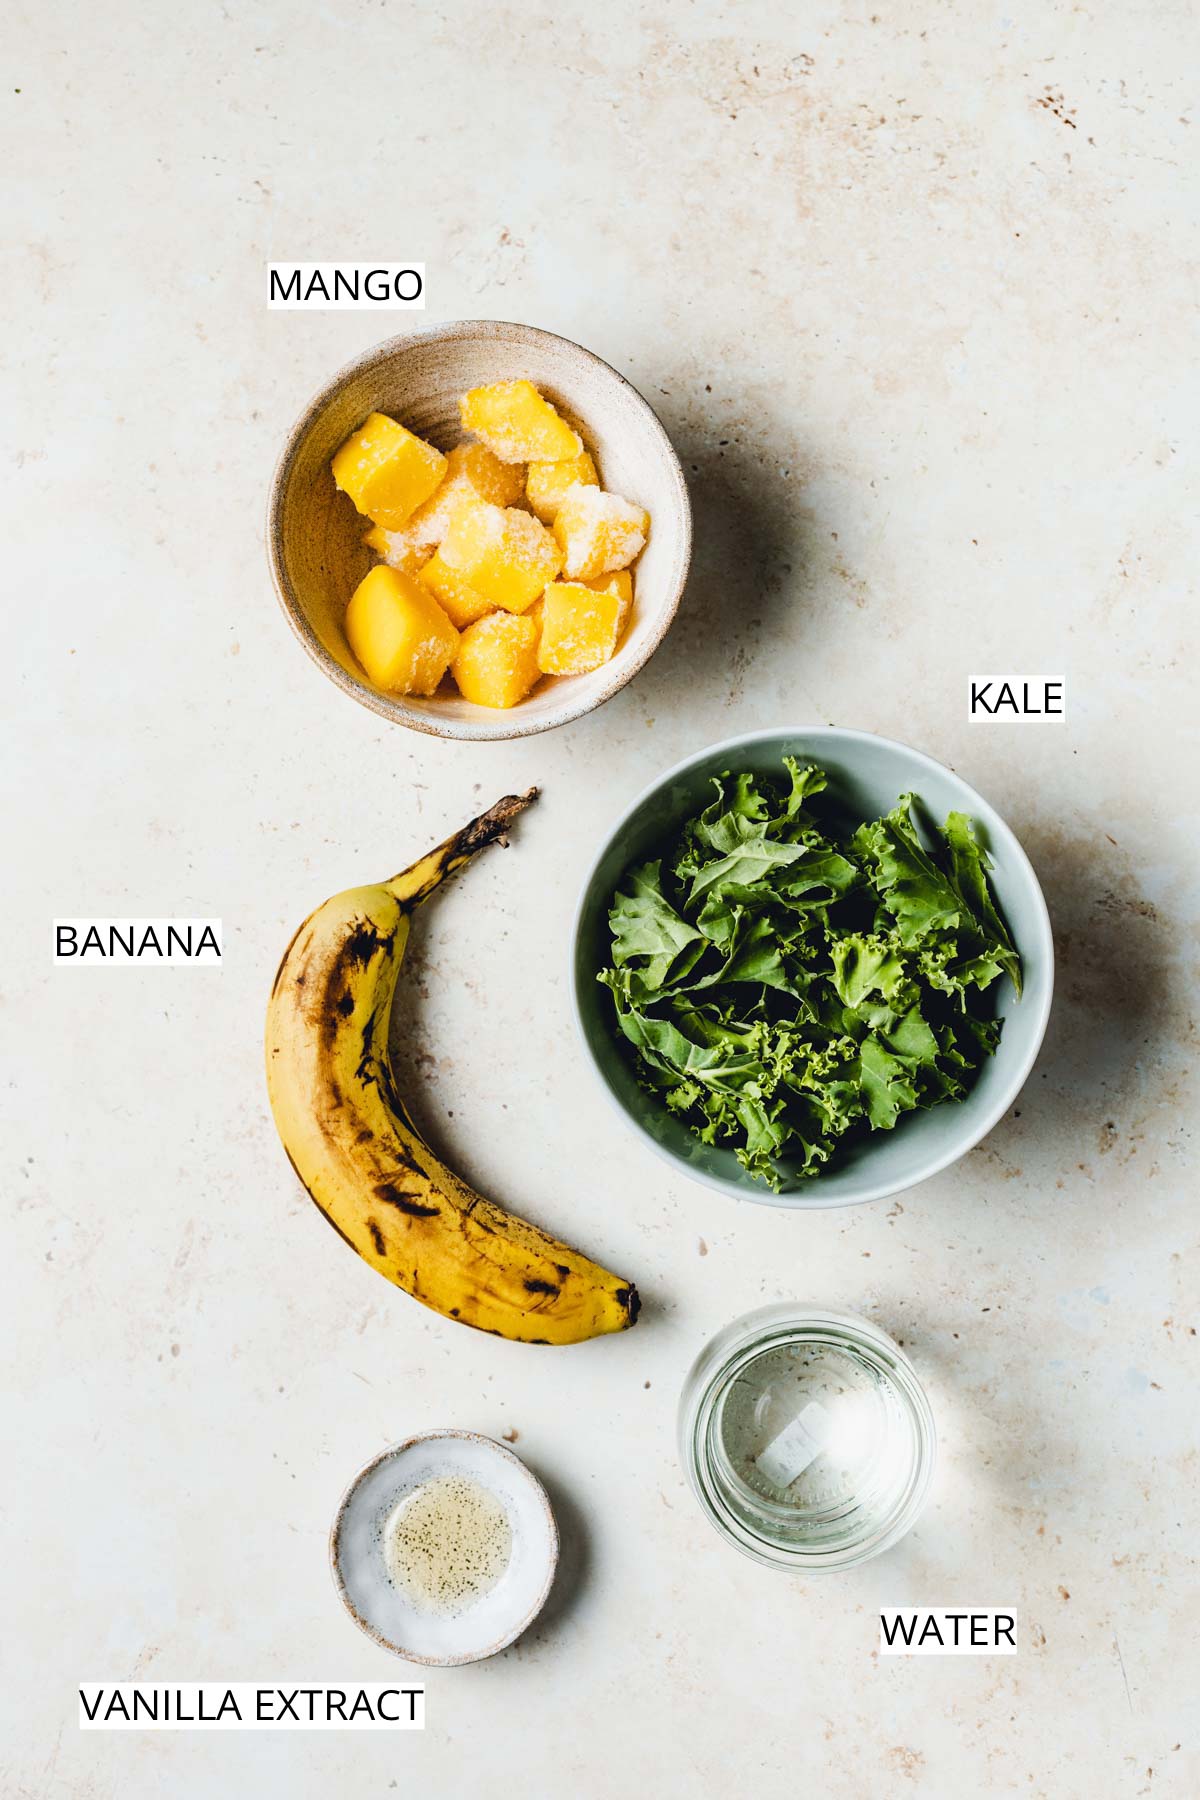 Bowls of mango, kale, vanilla extract, water and banana placed next to each other on a flat surface.